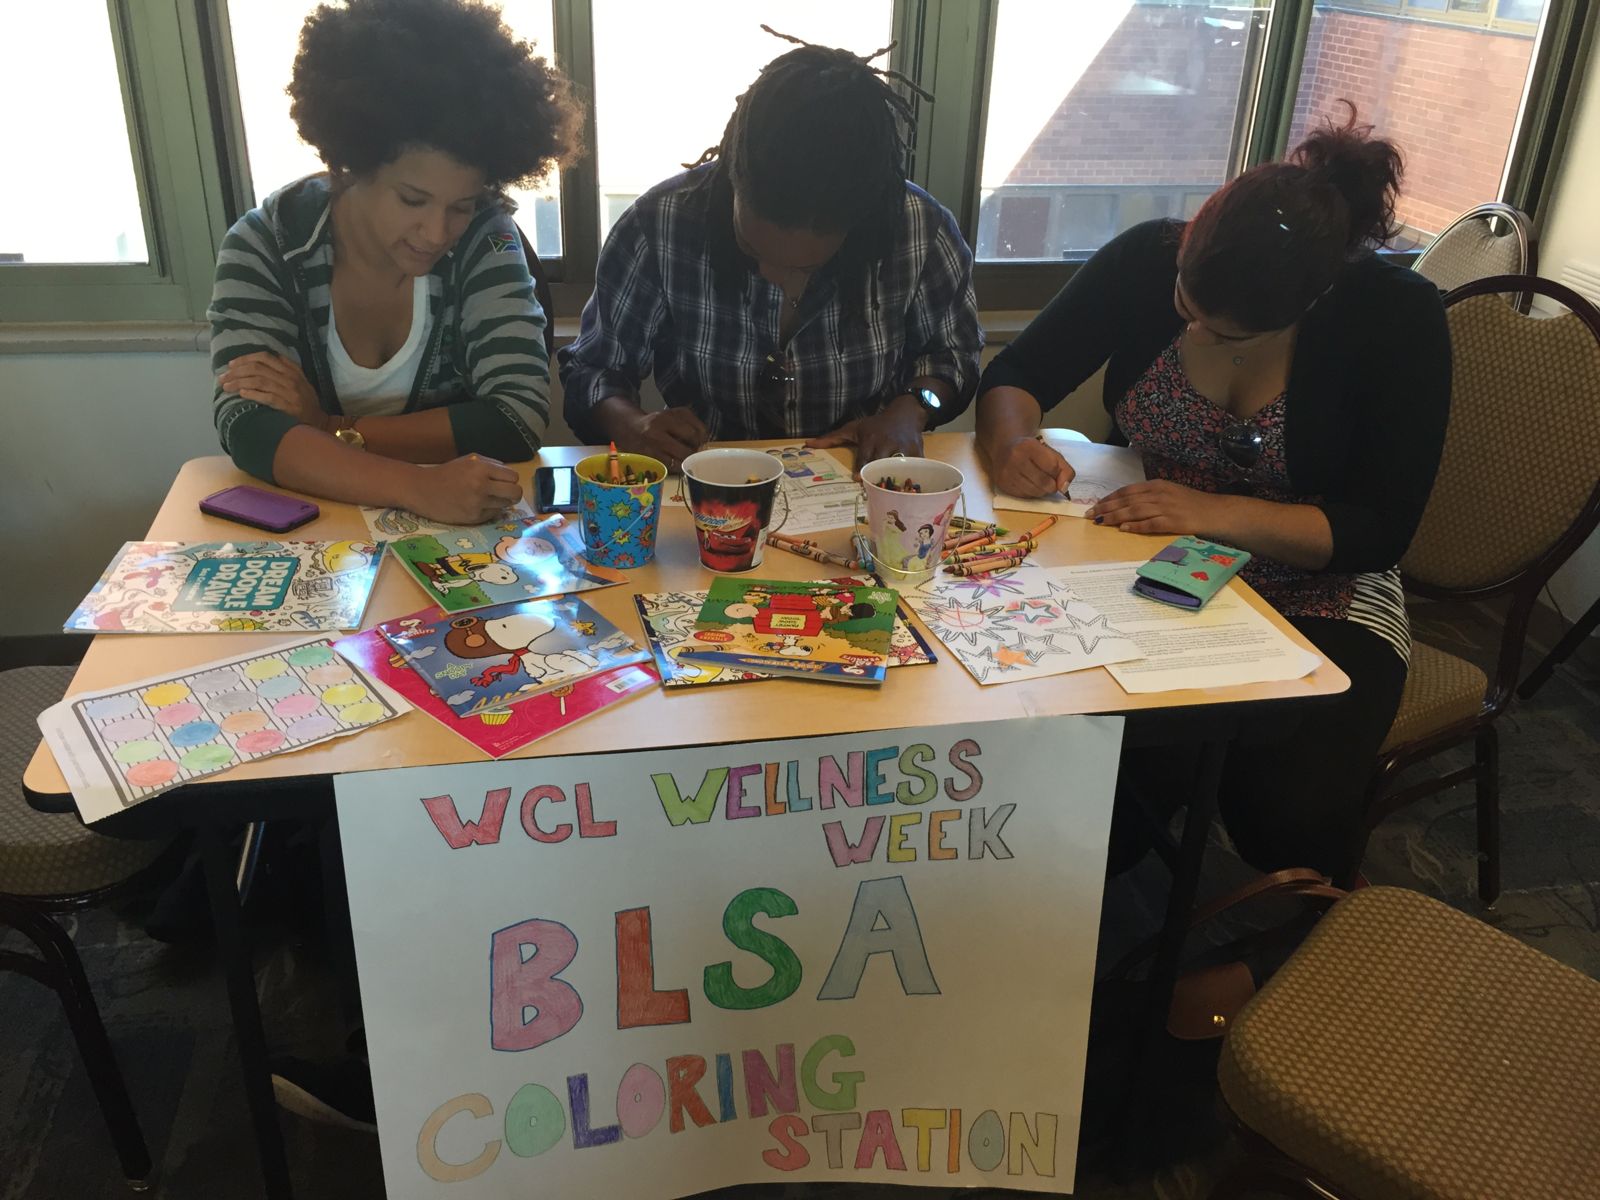 Students coloring to relieve stress